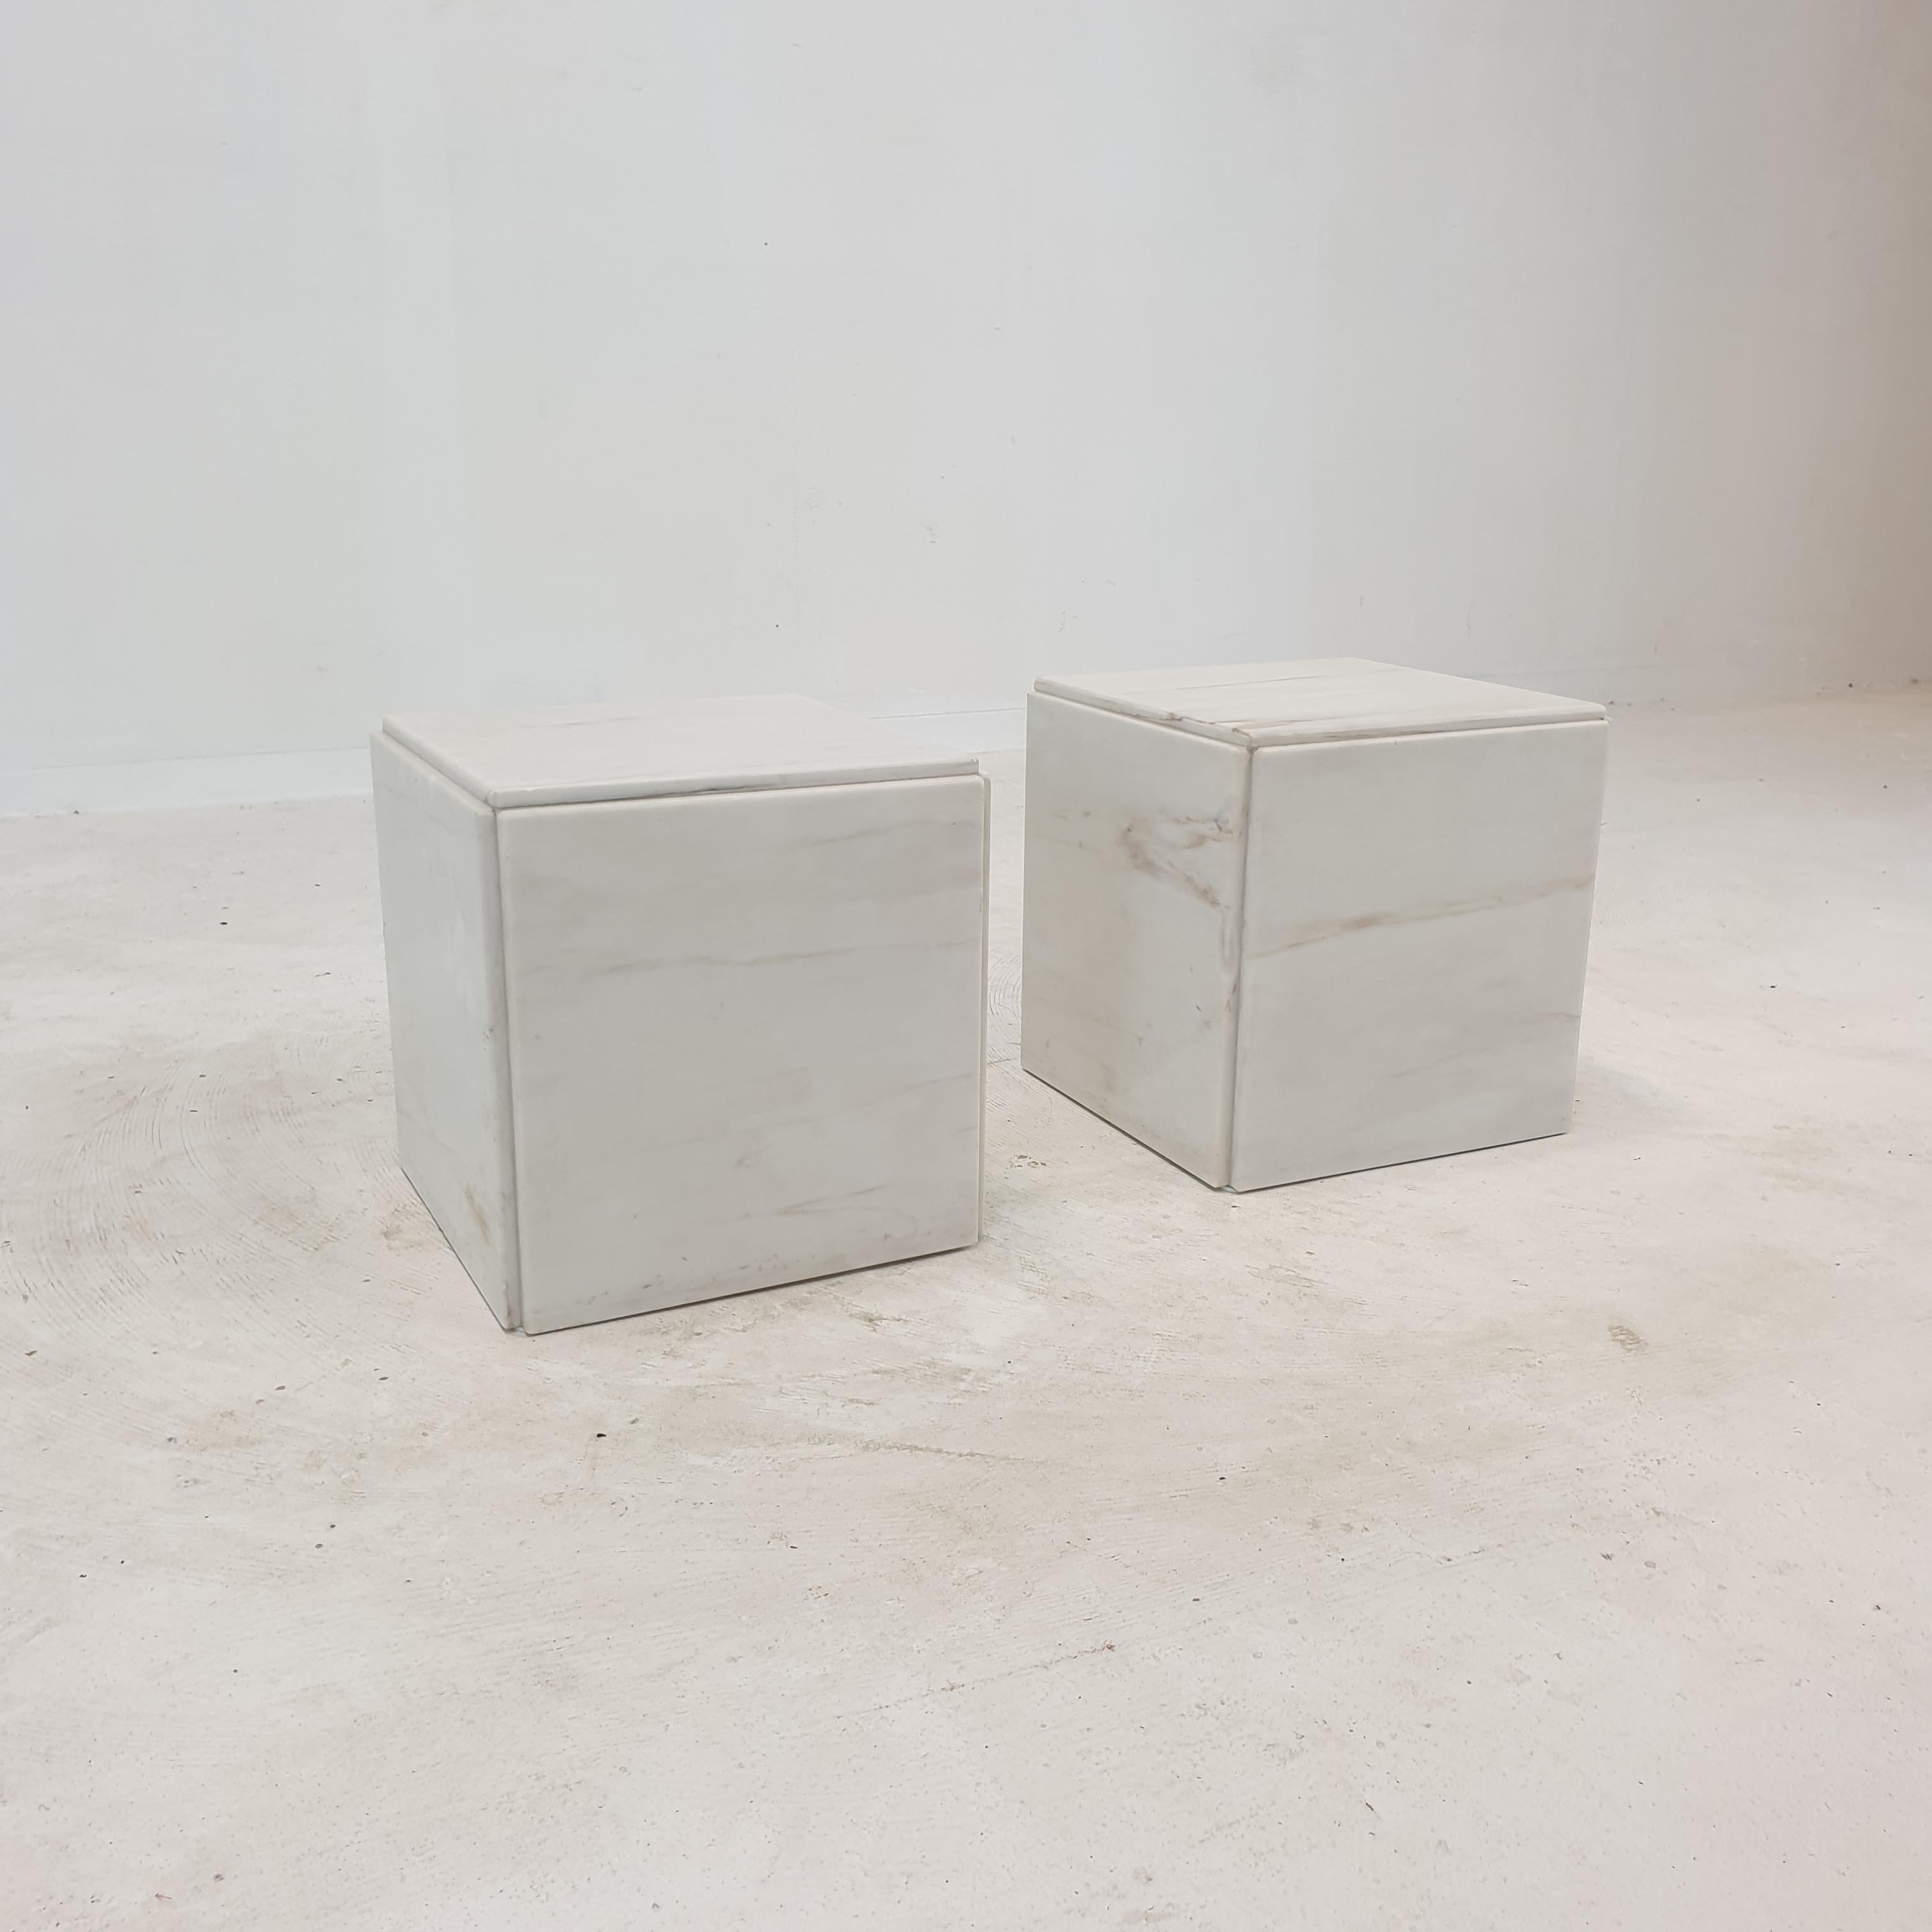 Hand-Crafted Set of 2 Italian Marble Pedestals or Side Tables, 1980's For Sale